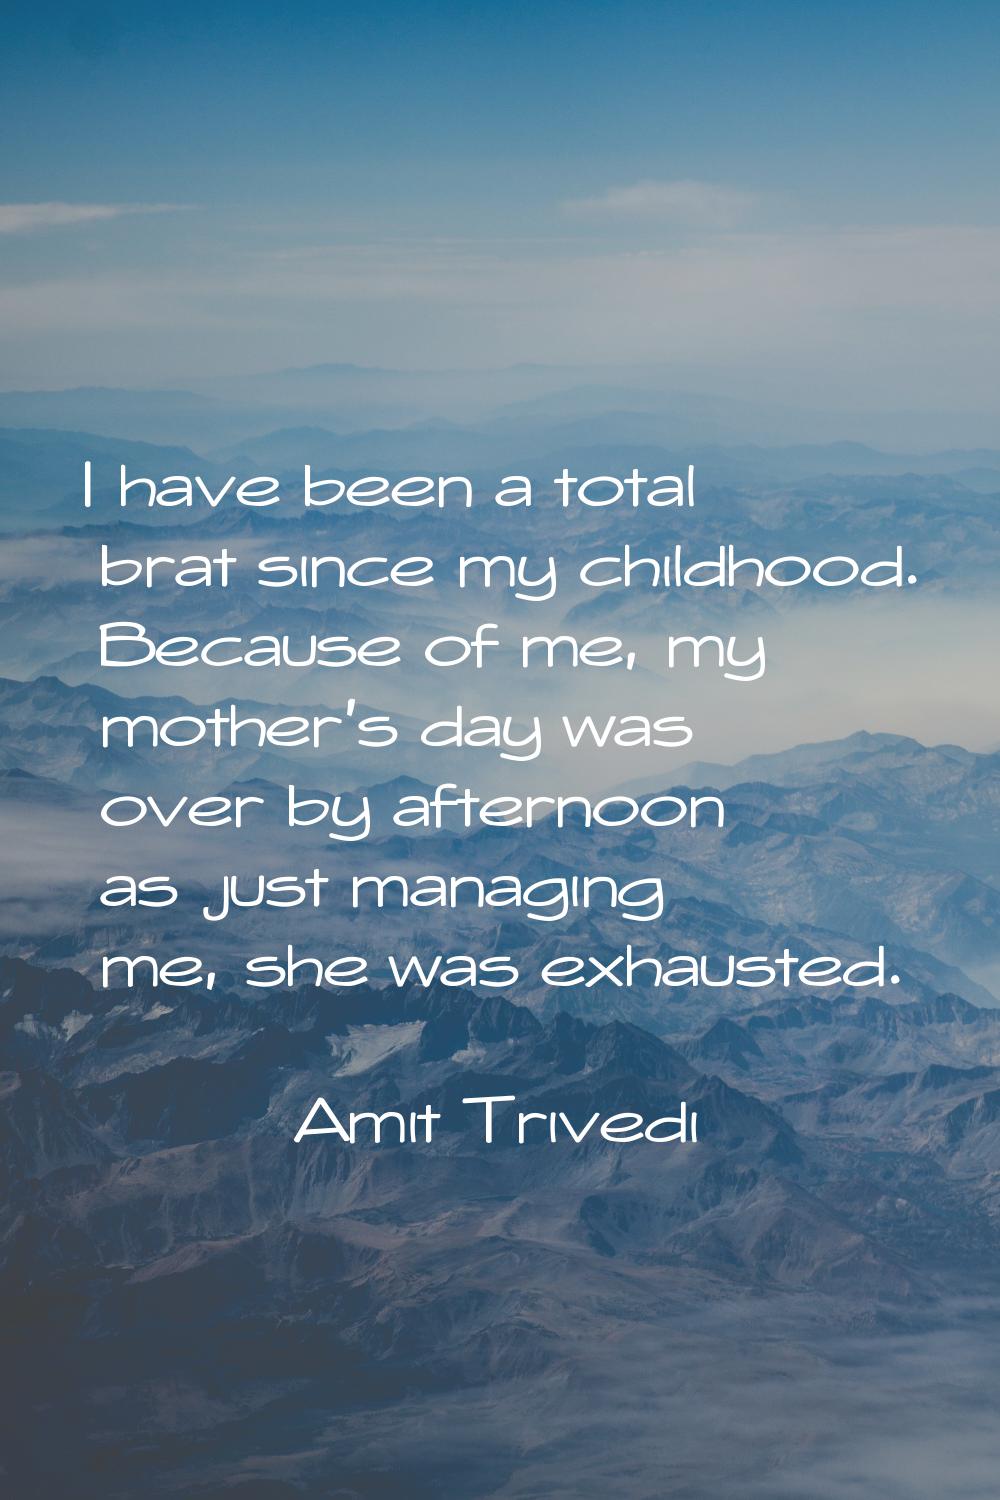 I have been a total brat since my childhood. Because of me, my mother's day was over by afternoon a